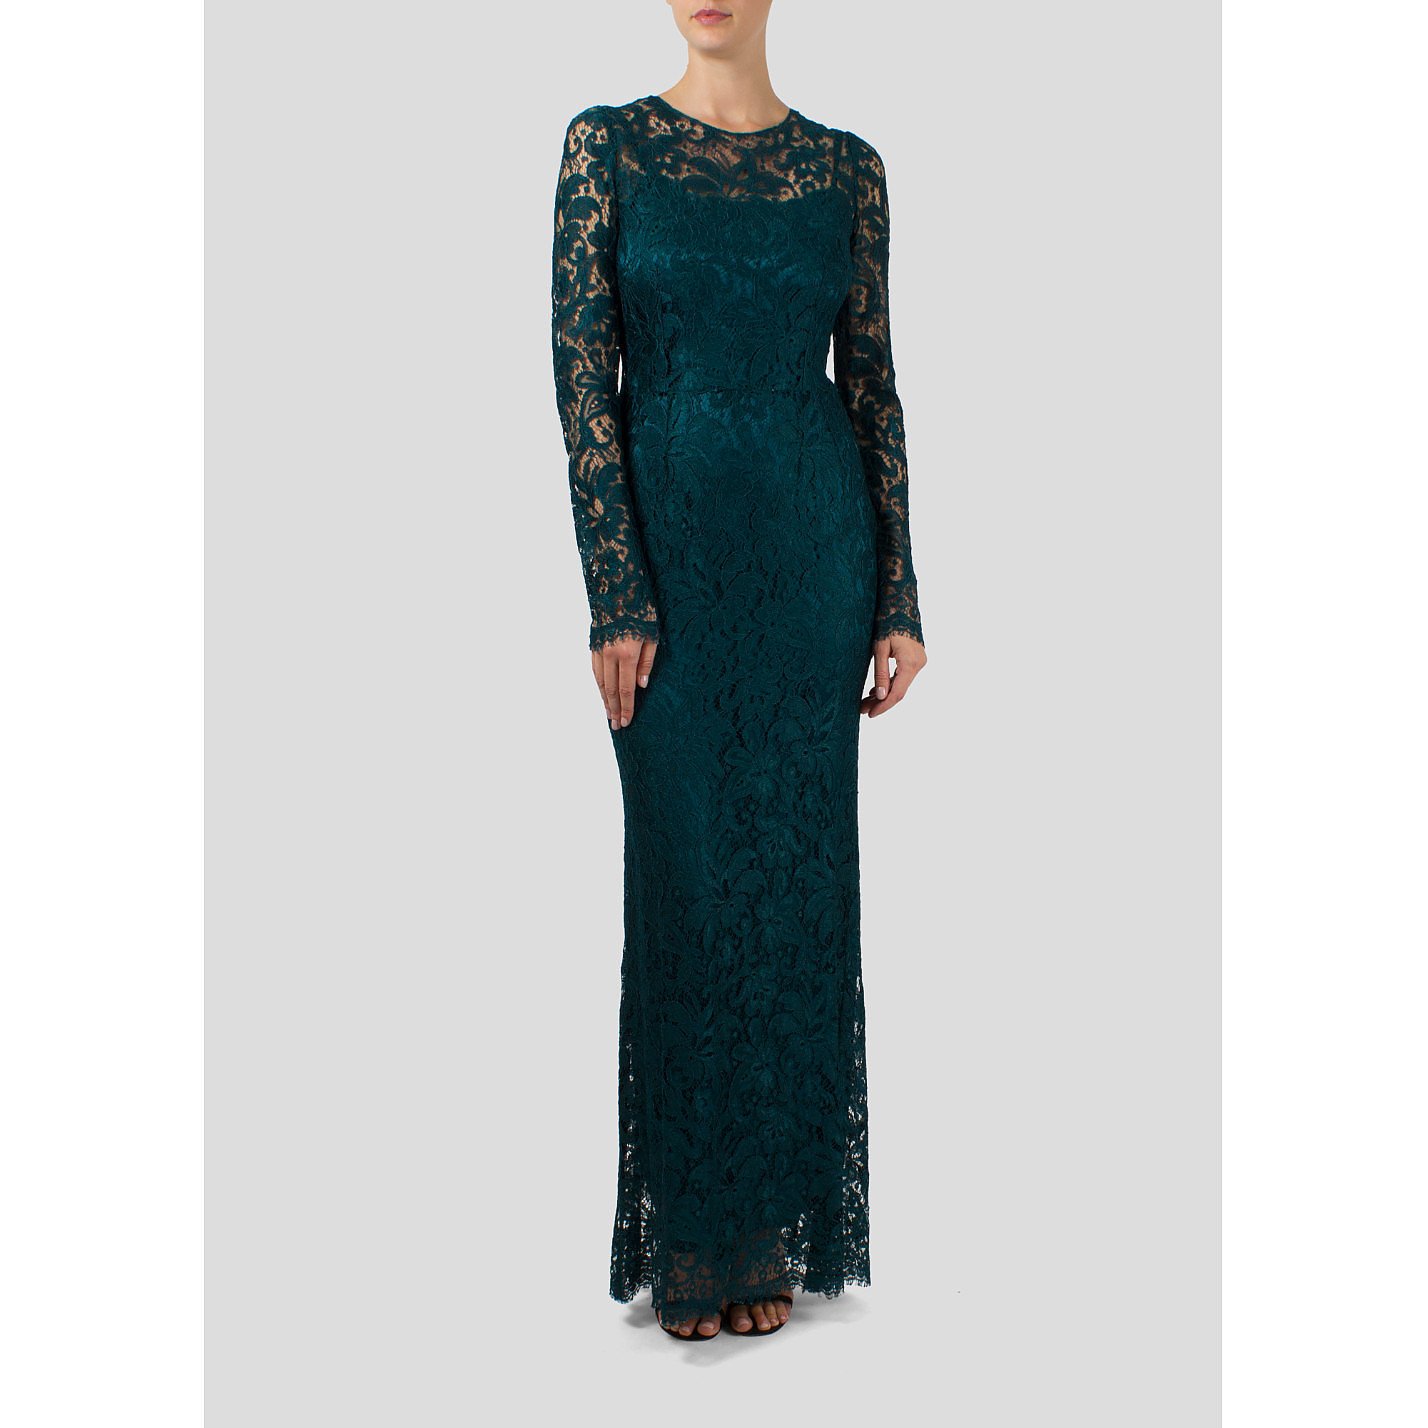 DOLCE & GABBANA Lace Gown